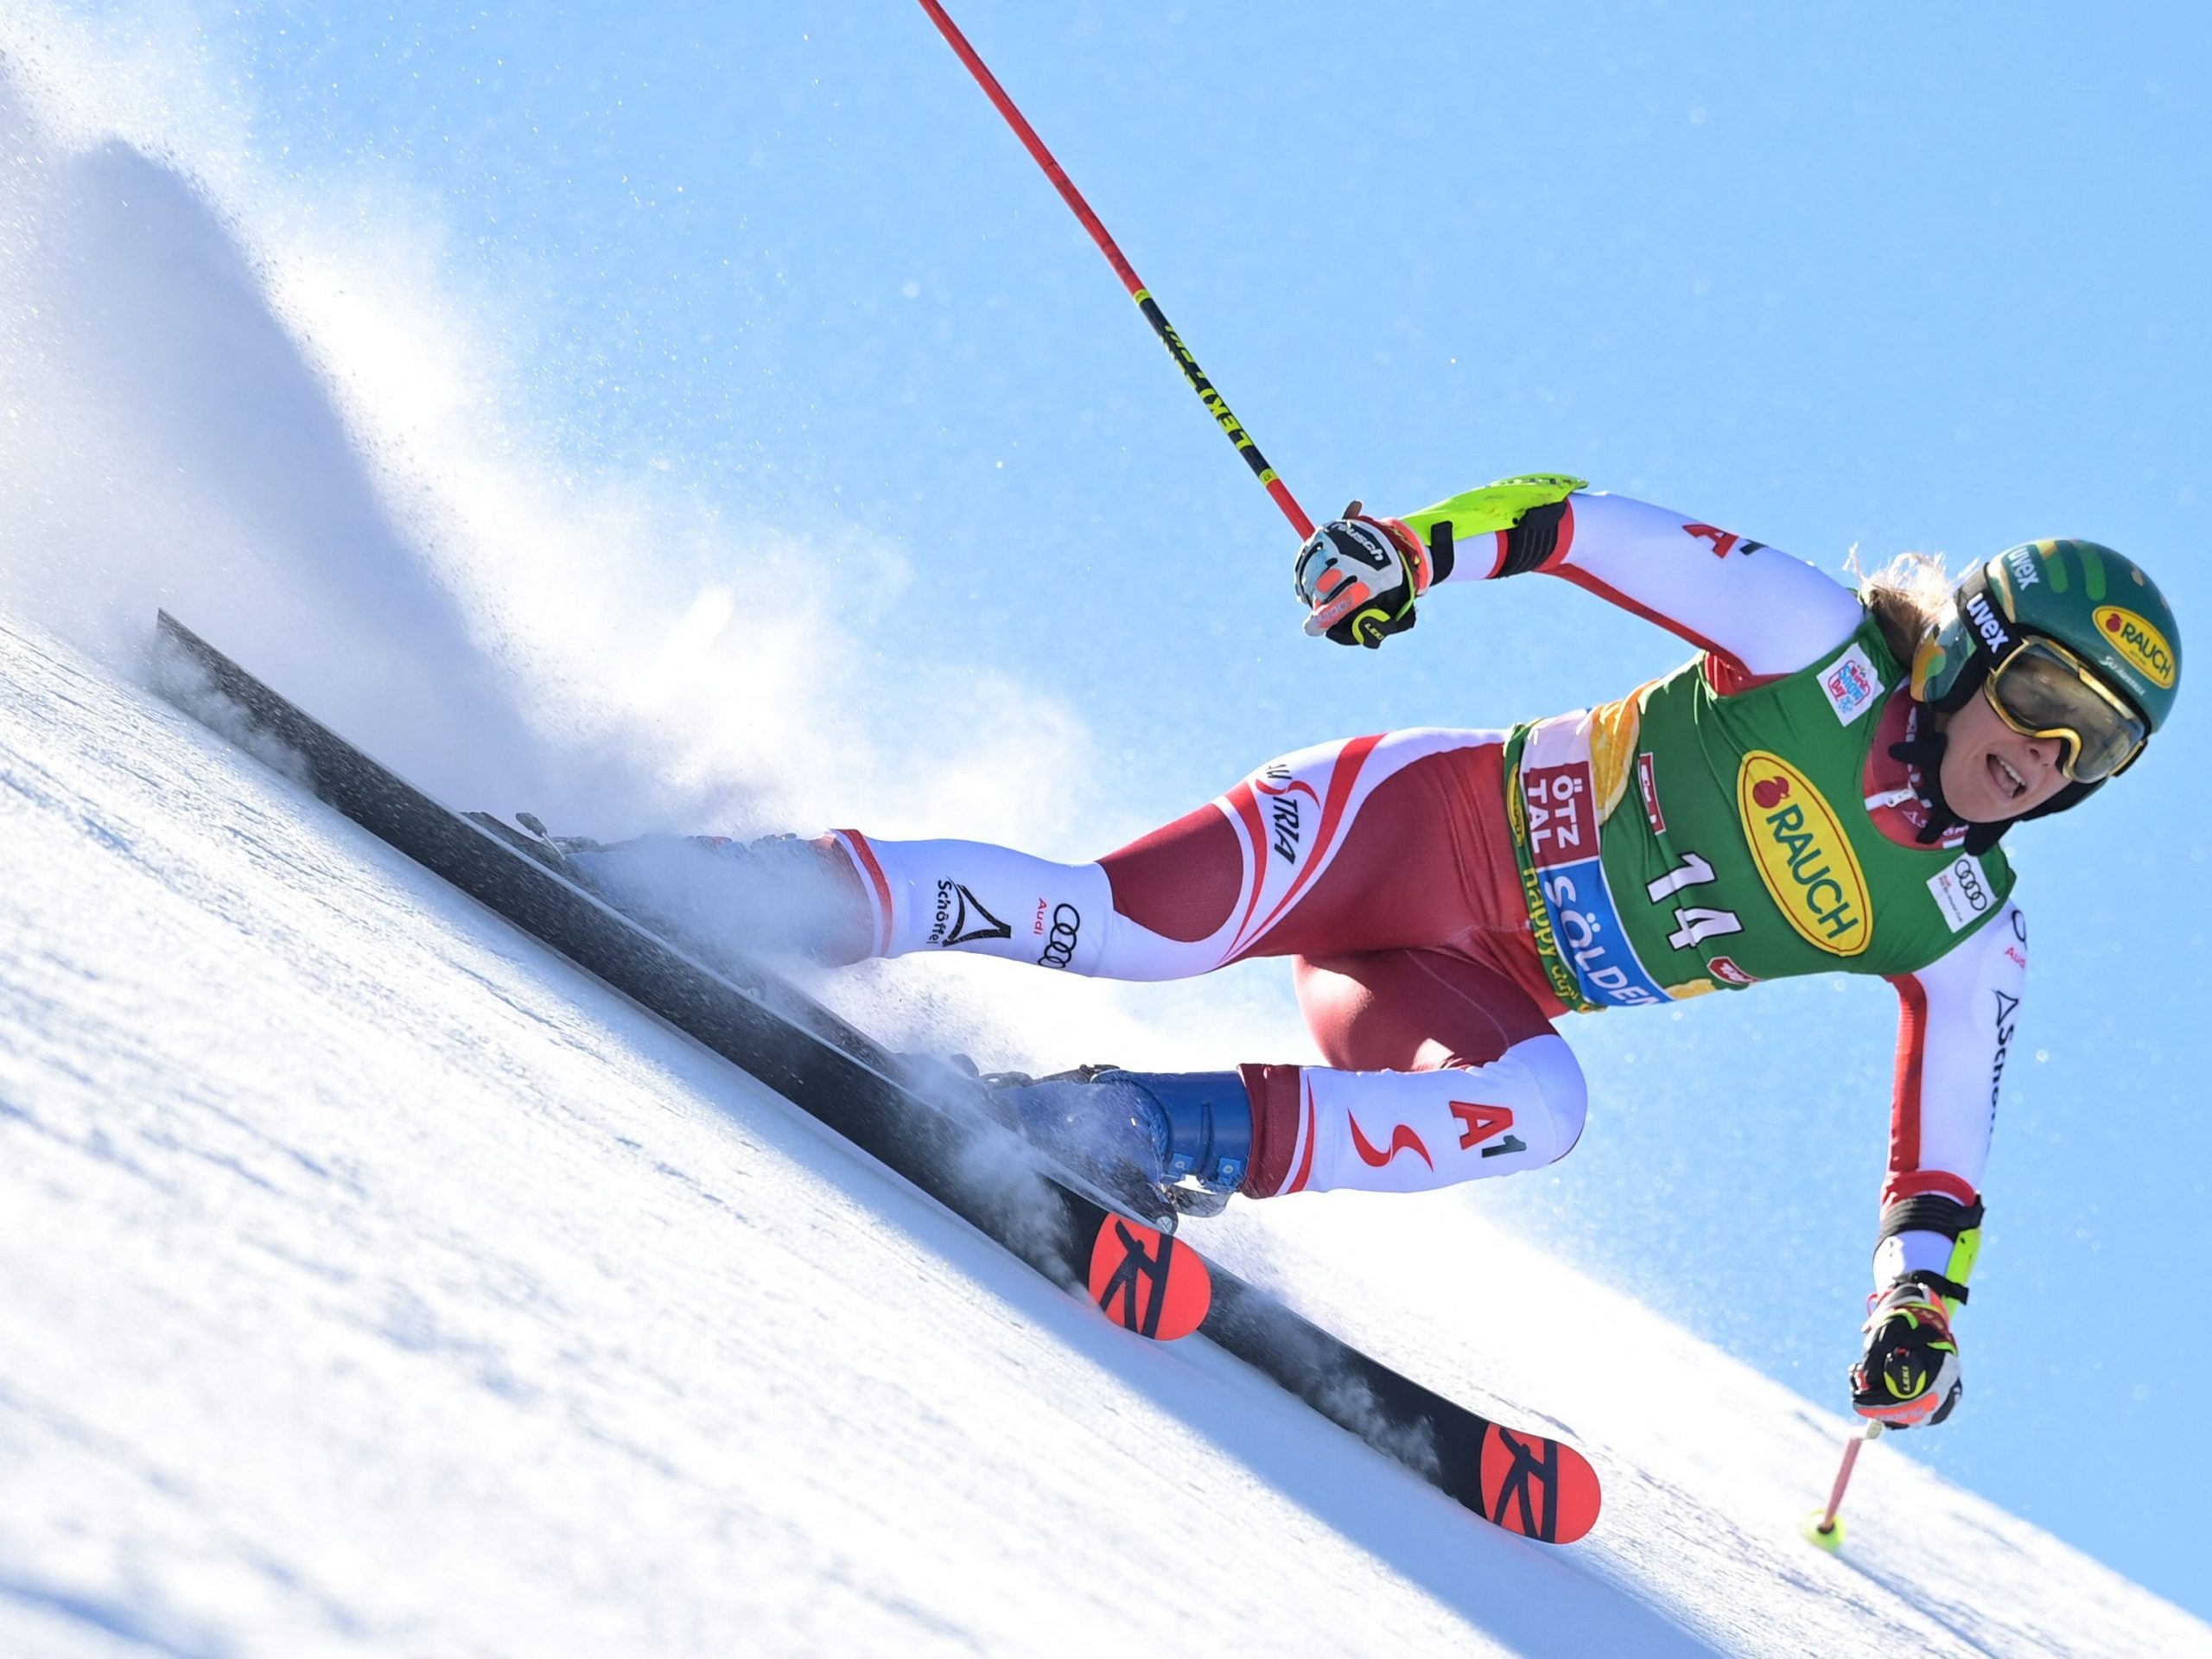 Alpine Skiing: Downhill in a zigzag between upright obstacles, Stephanie Brunner 3rd in the first half, Gut Bahrami, Sports. 2560x1920 HD Background.